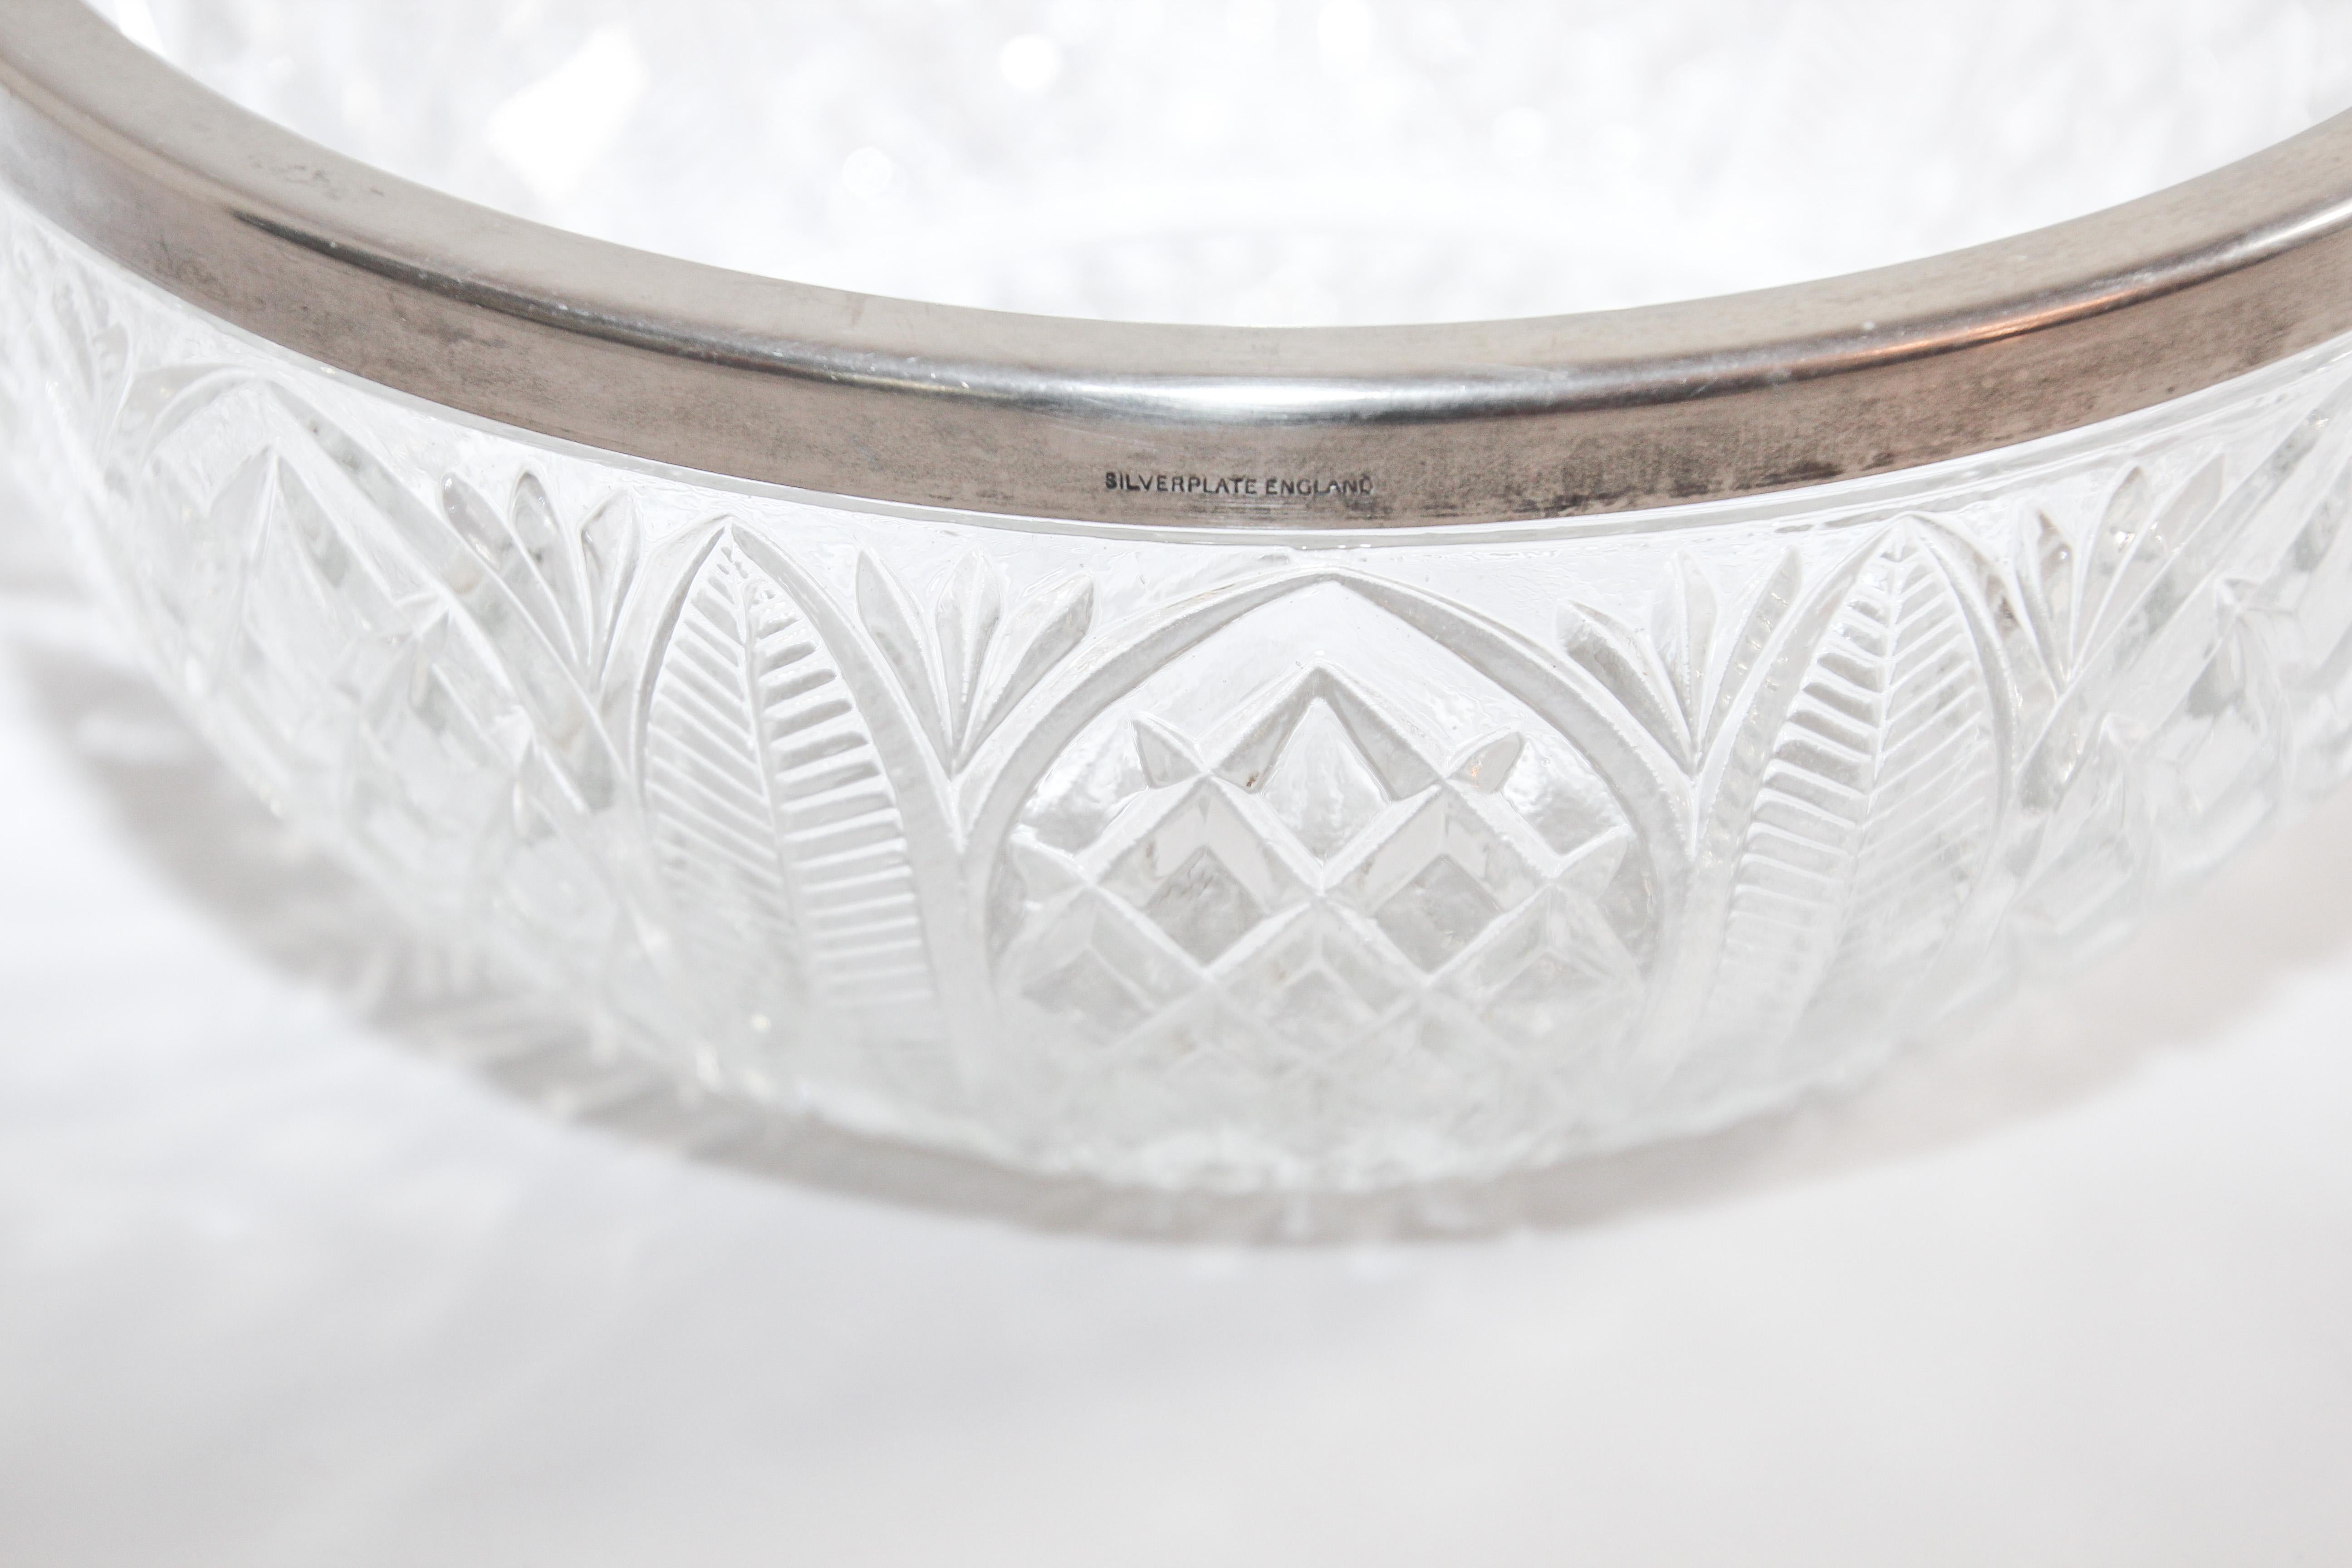 Vintage Large Crystal Bowl with Silver Plated Rim 4